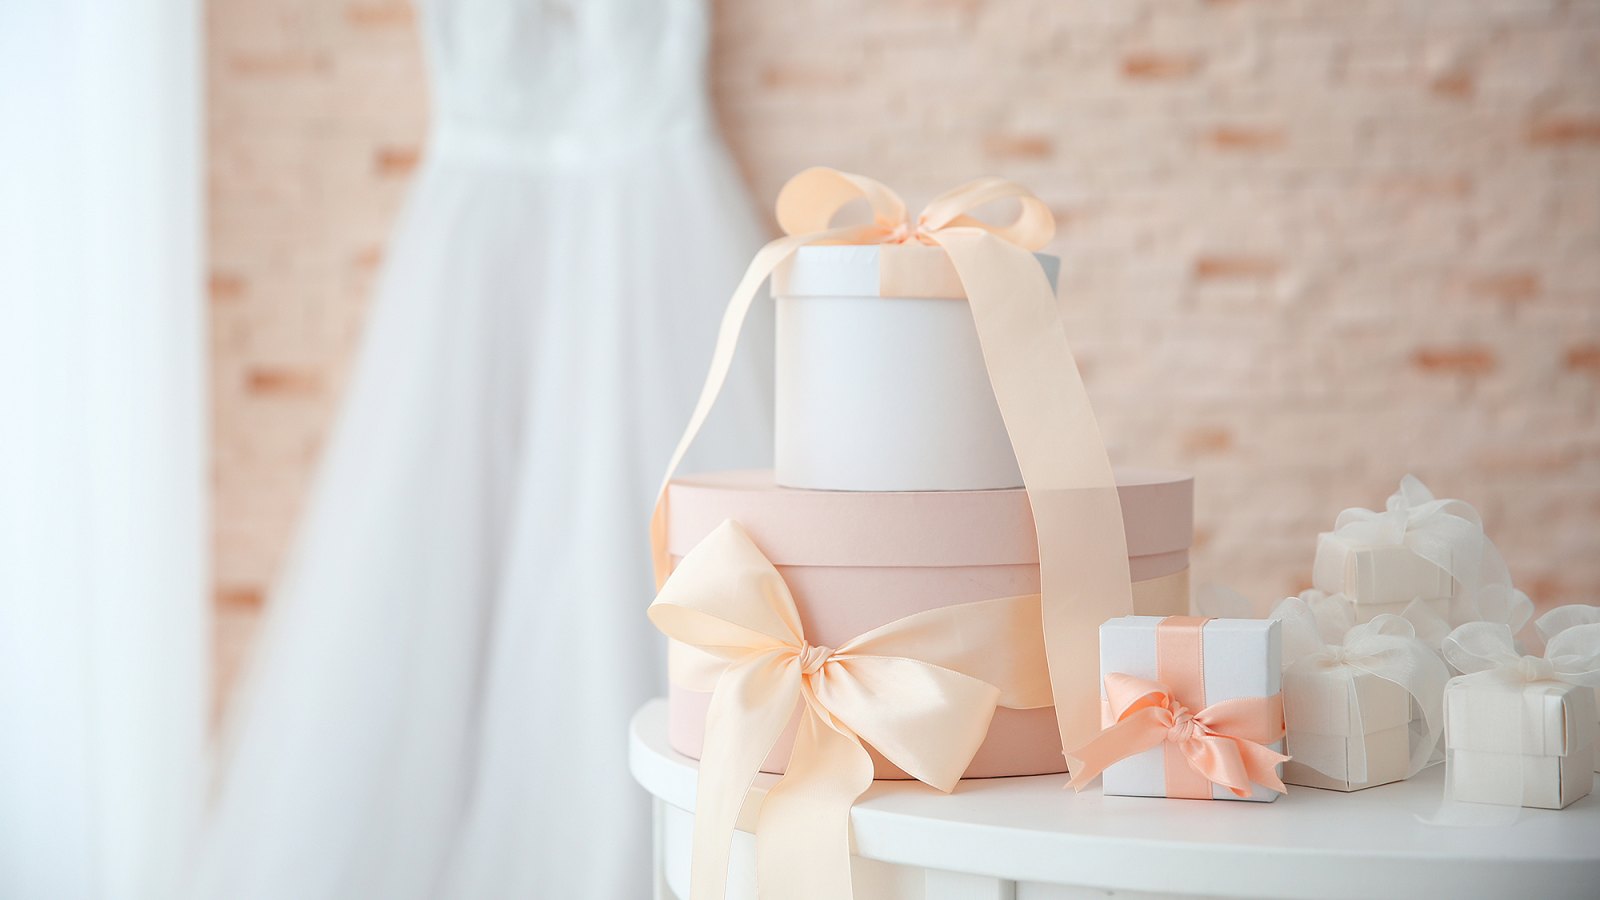 Unique Wedding Gifts for Every Kind of Wedding - Ideas The Couple